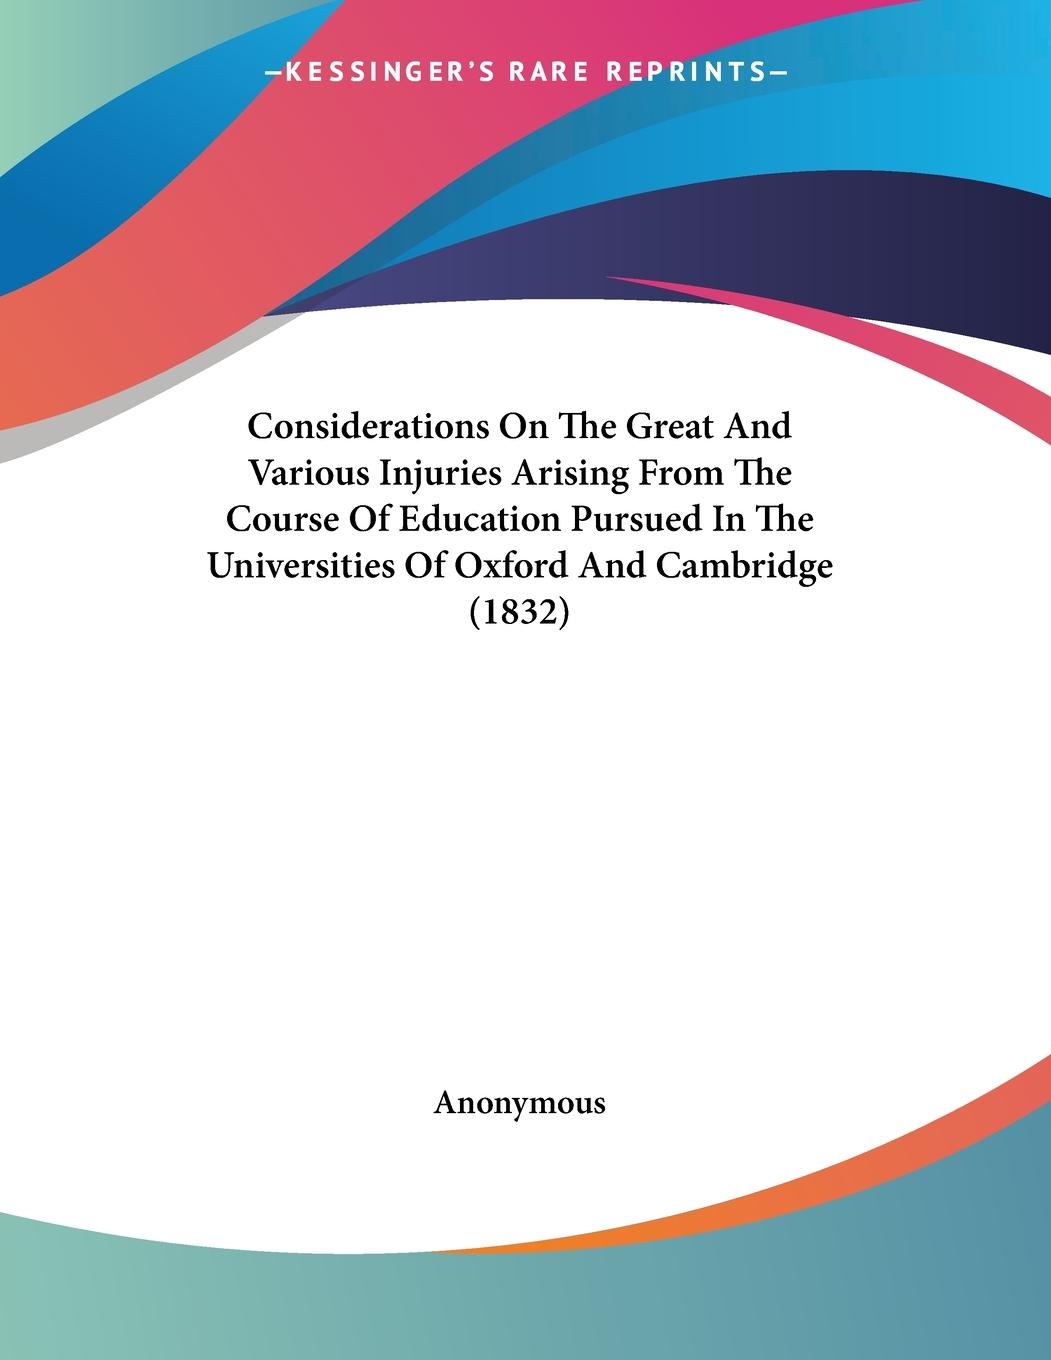 Considerations On The Great And Various Injuries Arising From The Course Of Education Pursued In The Universities Of Oxford And Cambridge (1832) - Anonymous